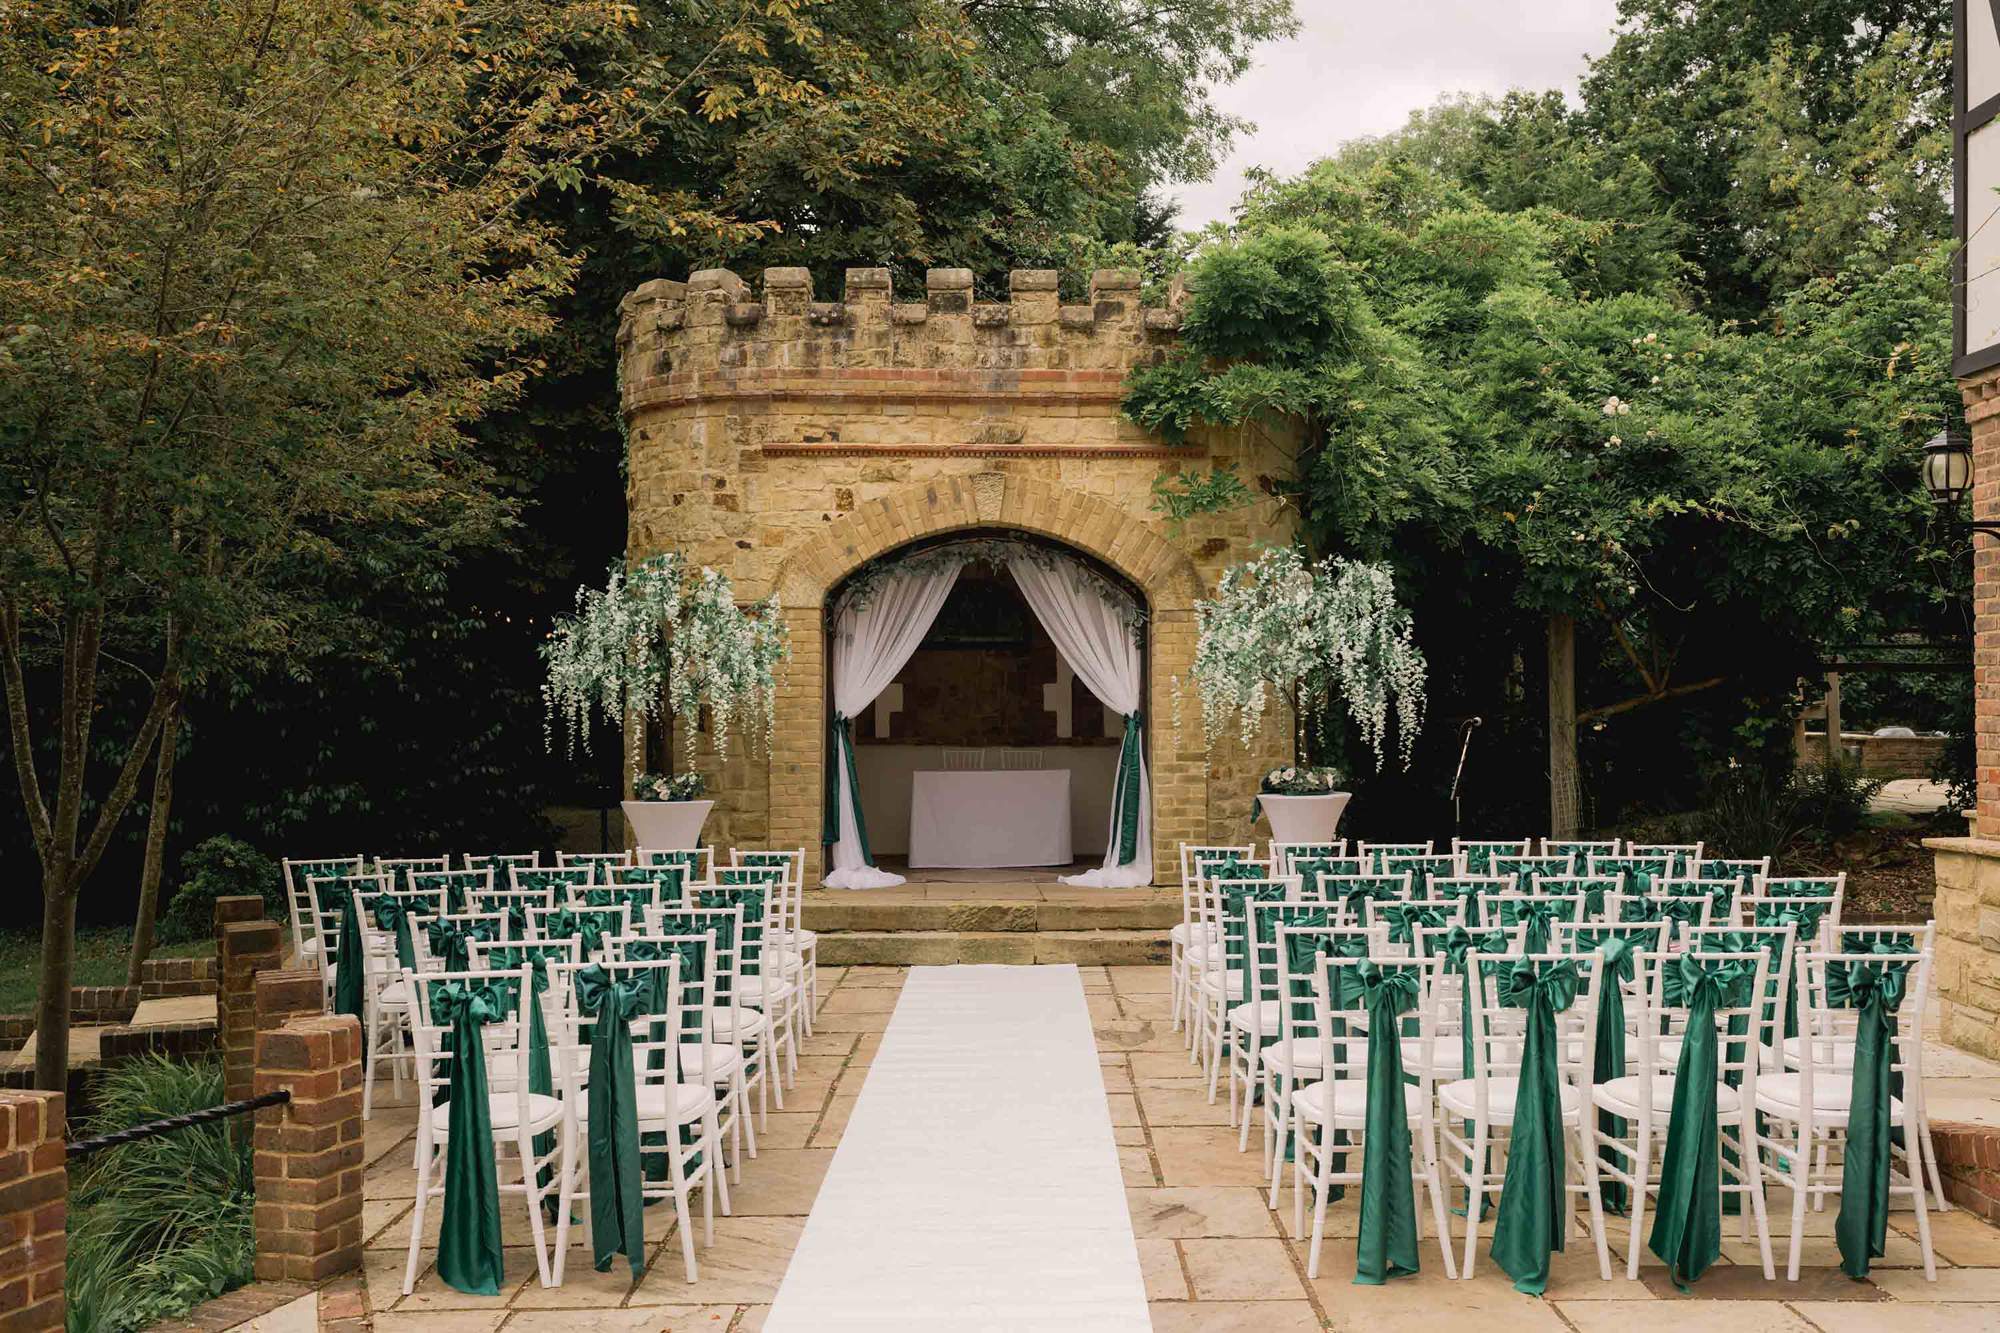 Outdoor wedding ceremony set up at the Ravenswood Hotel in Sussex.